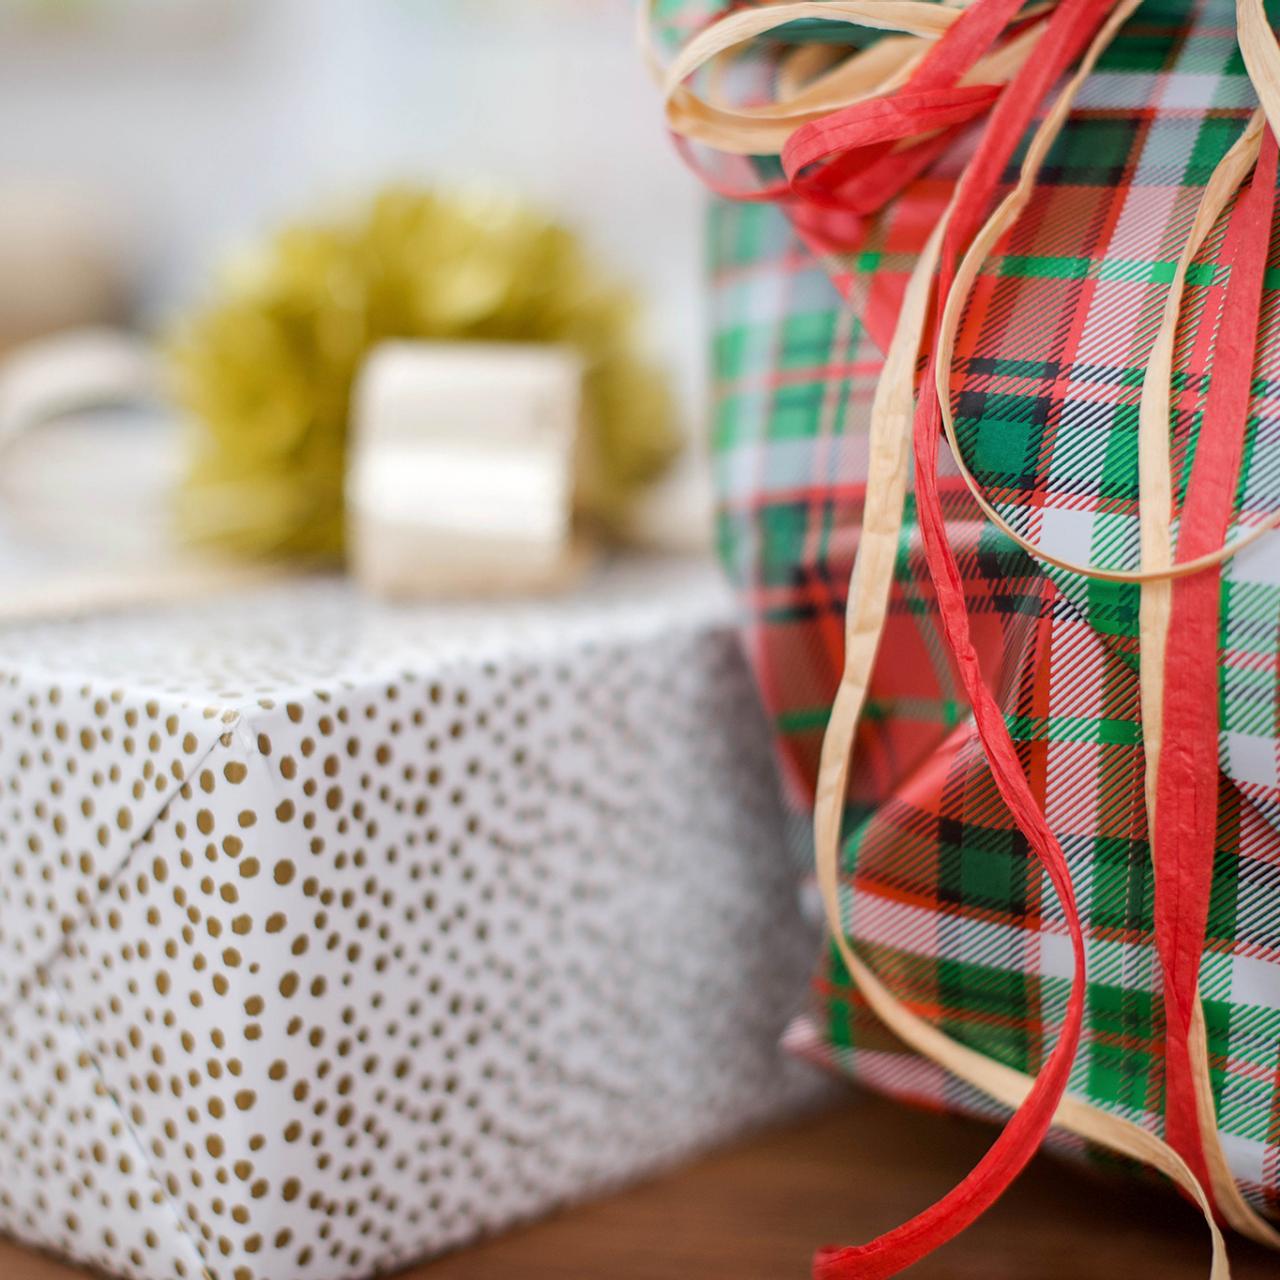 How to Perfectly Wrap a Gift, Wrapping a Present Step-by-Step